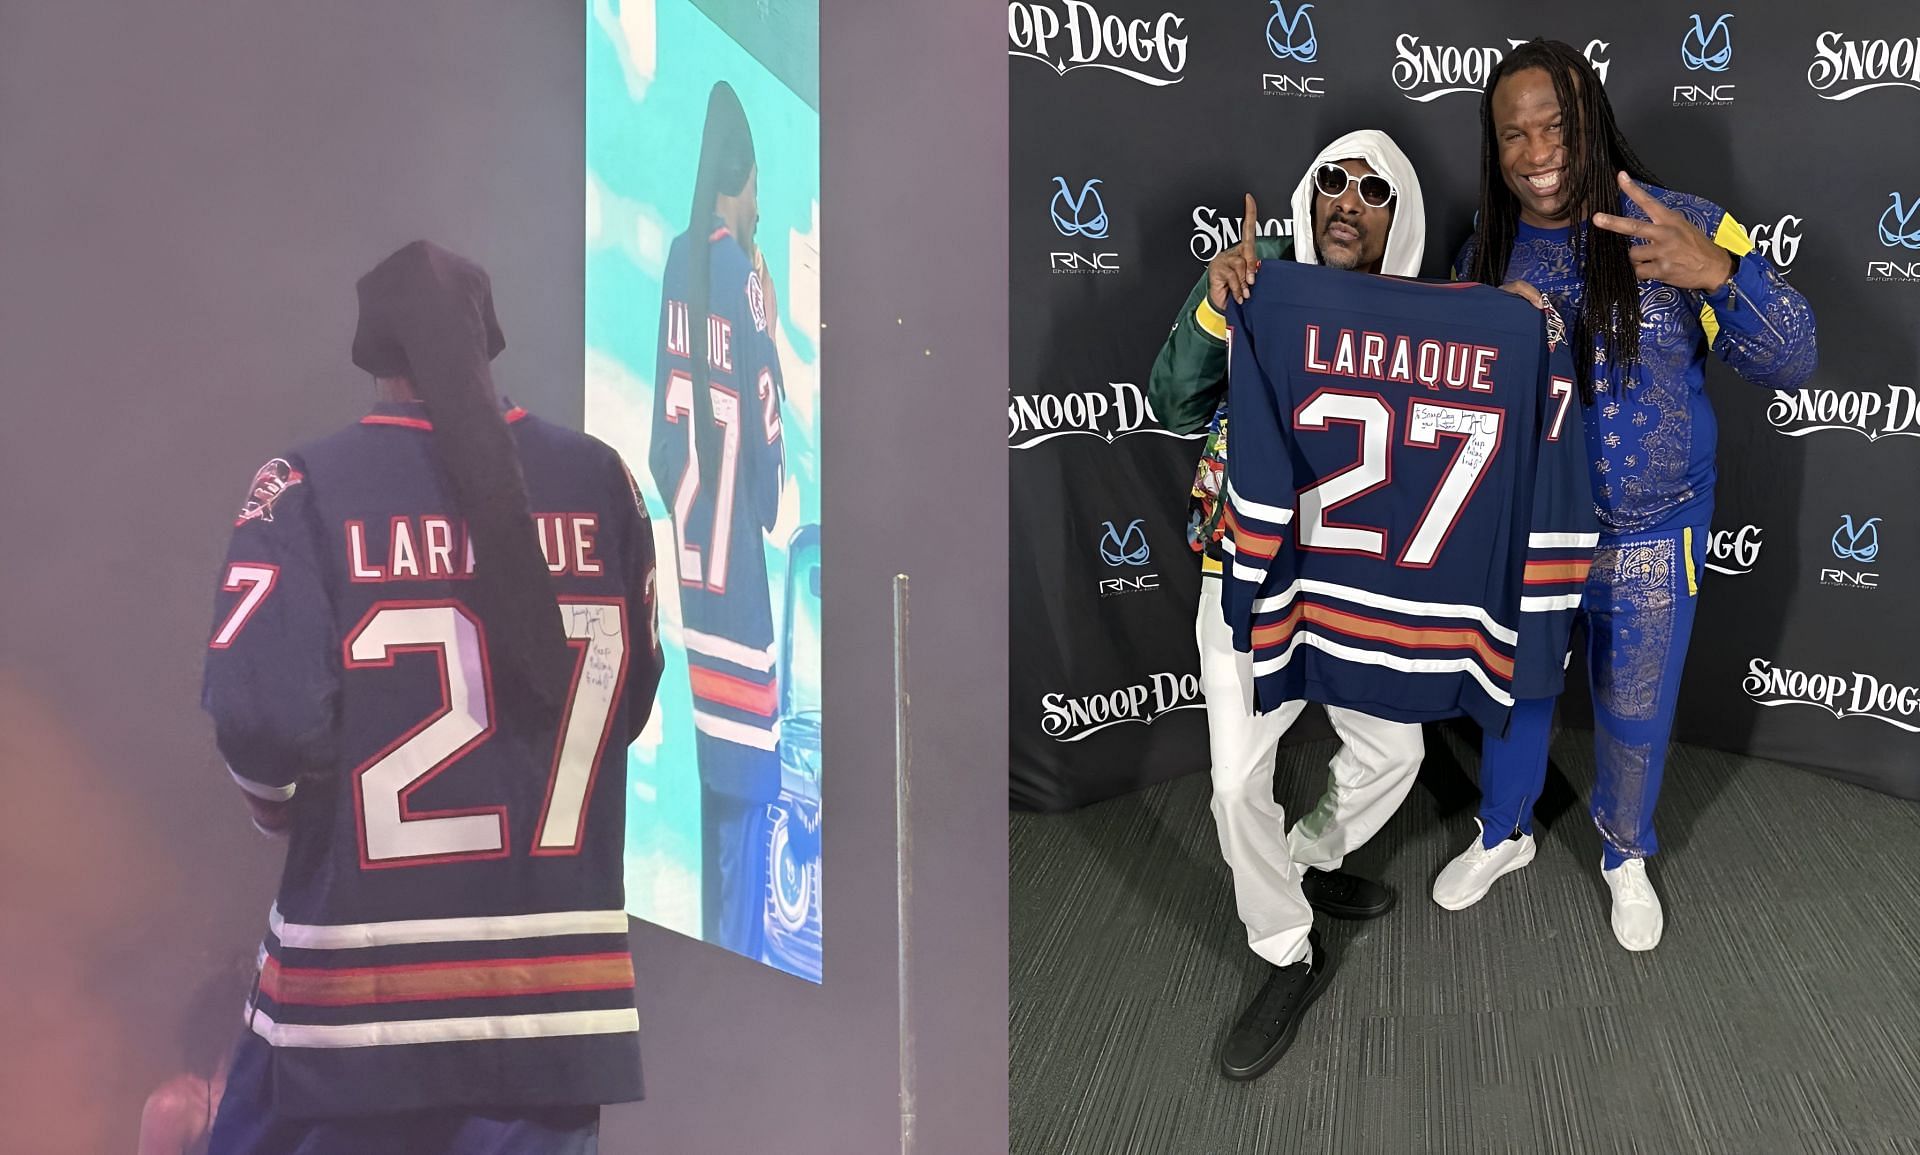 NHL fans react as Snoop Dogg takes over Edmonton Oilers arena donning ex-Oiler Georges Laraque